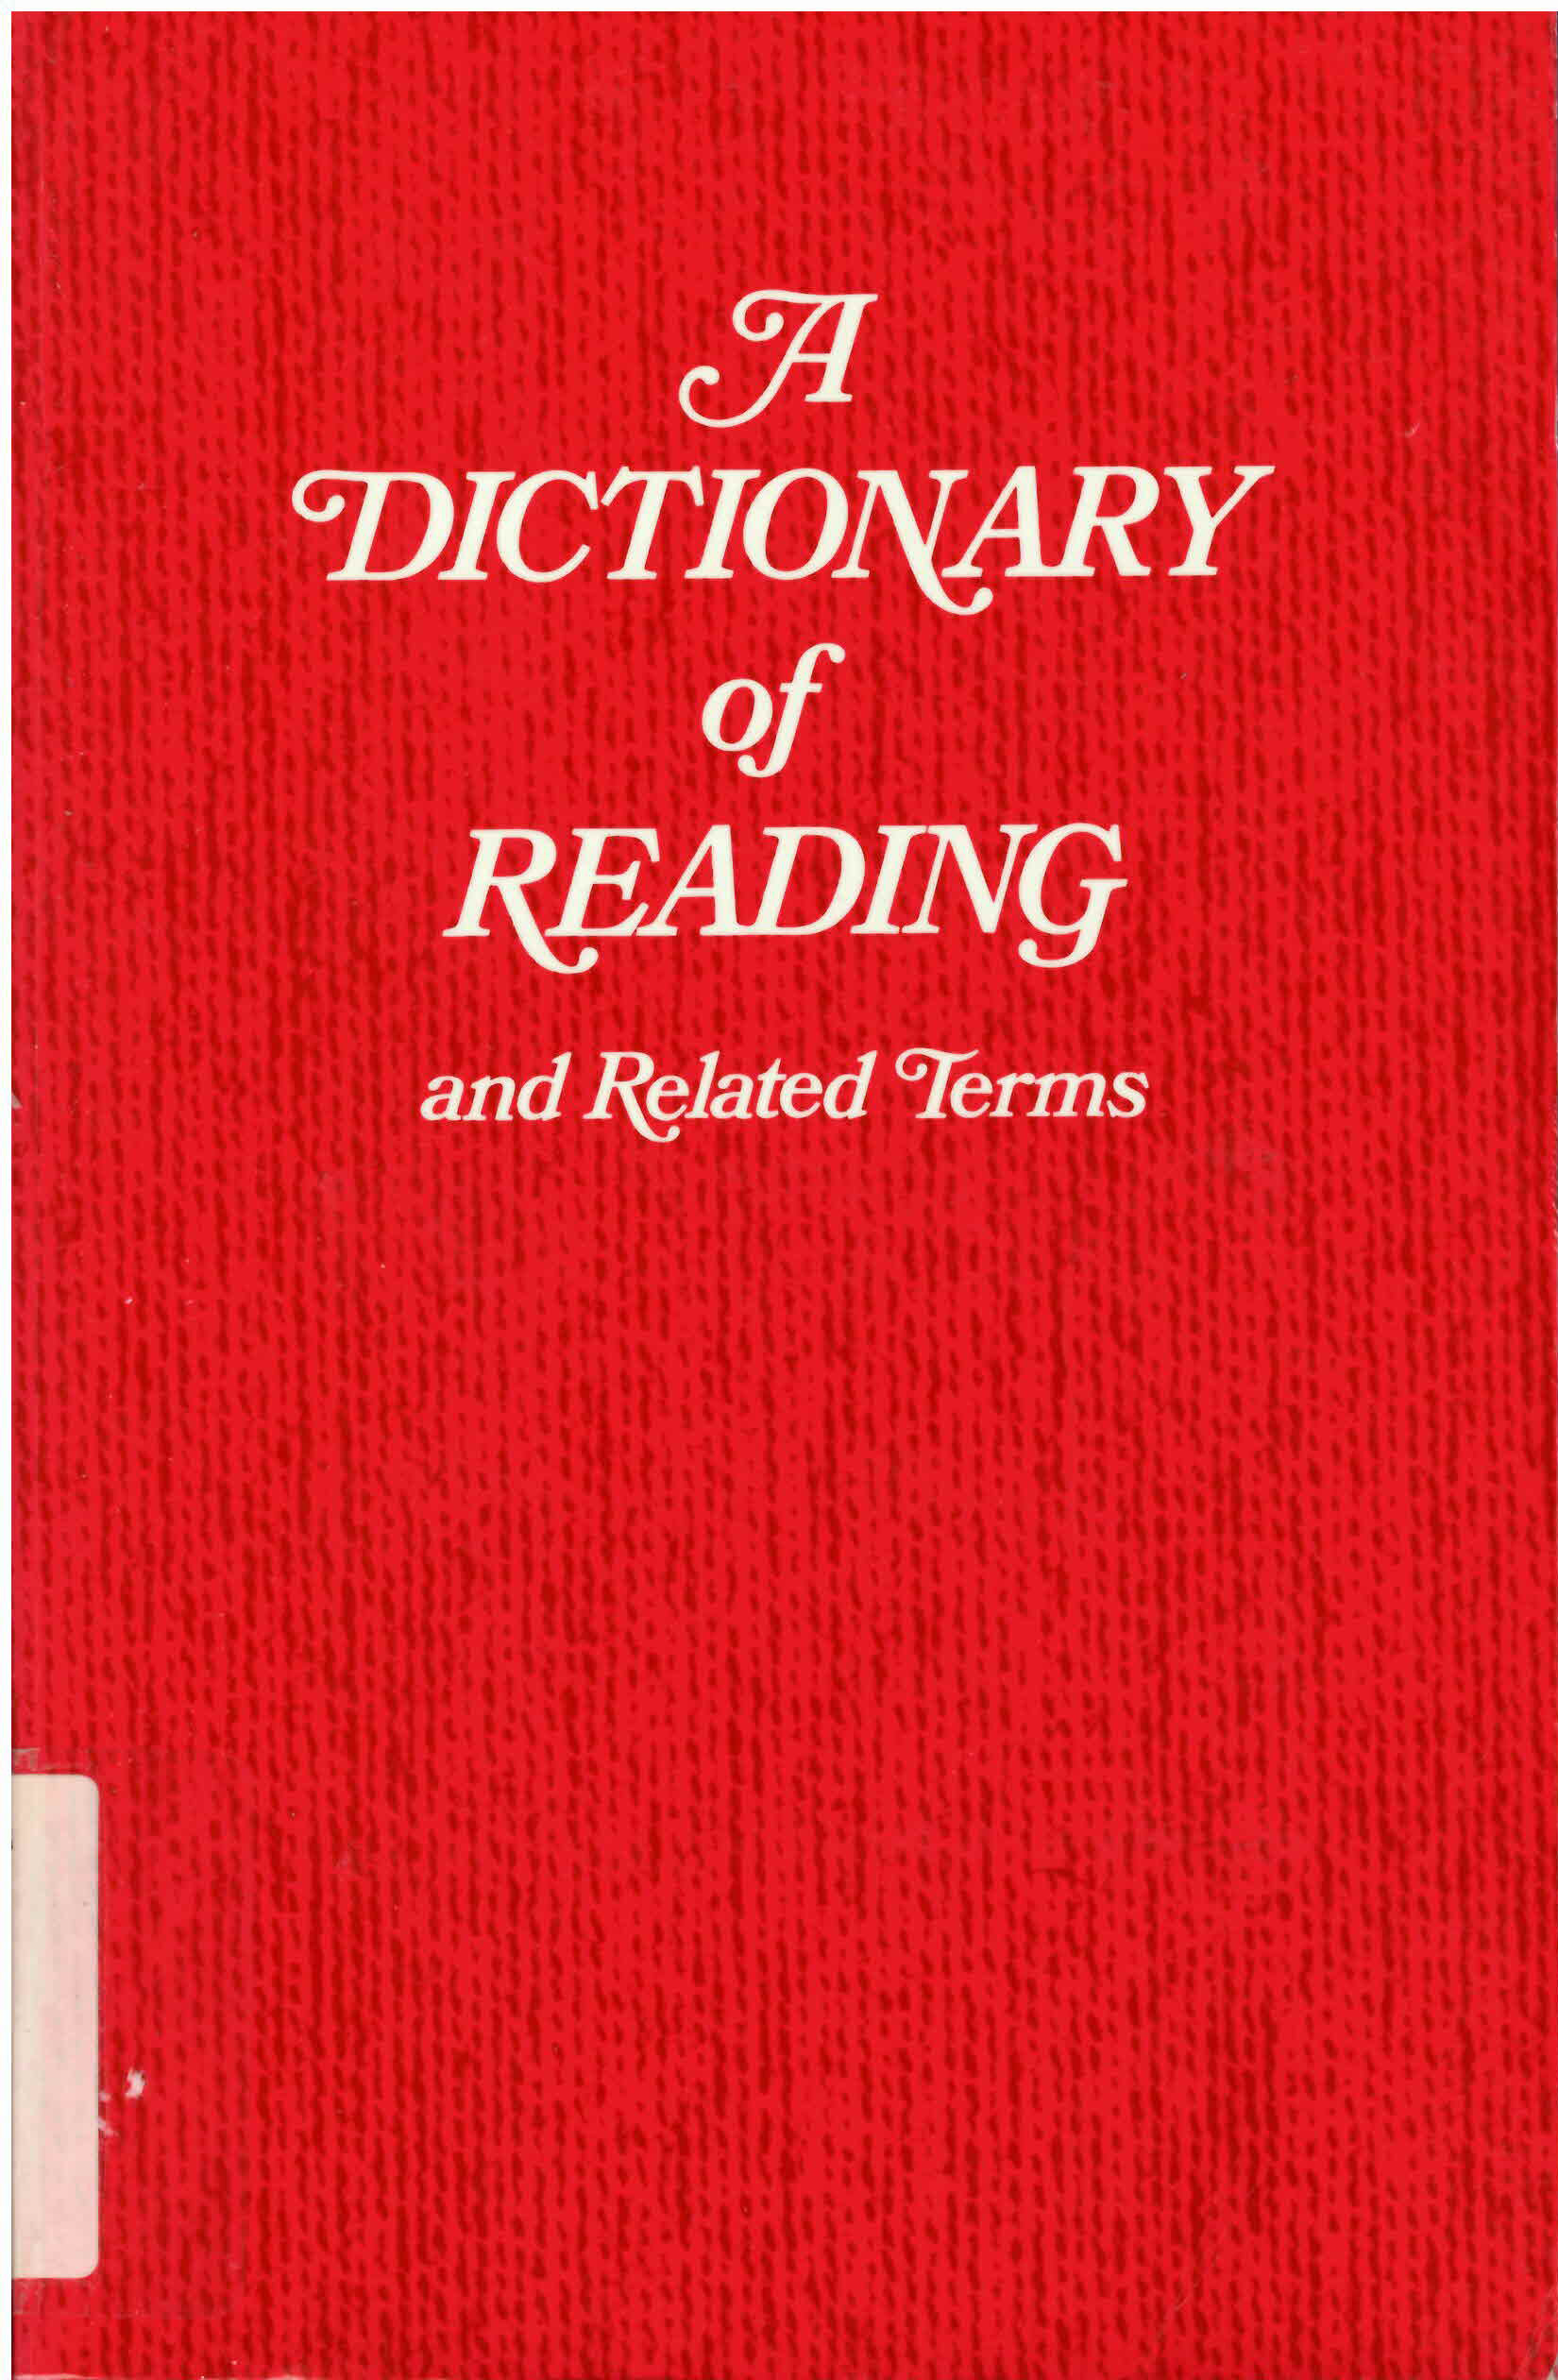 Dictionary of reading and related terms